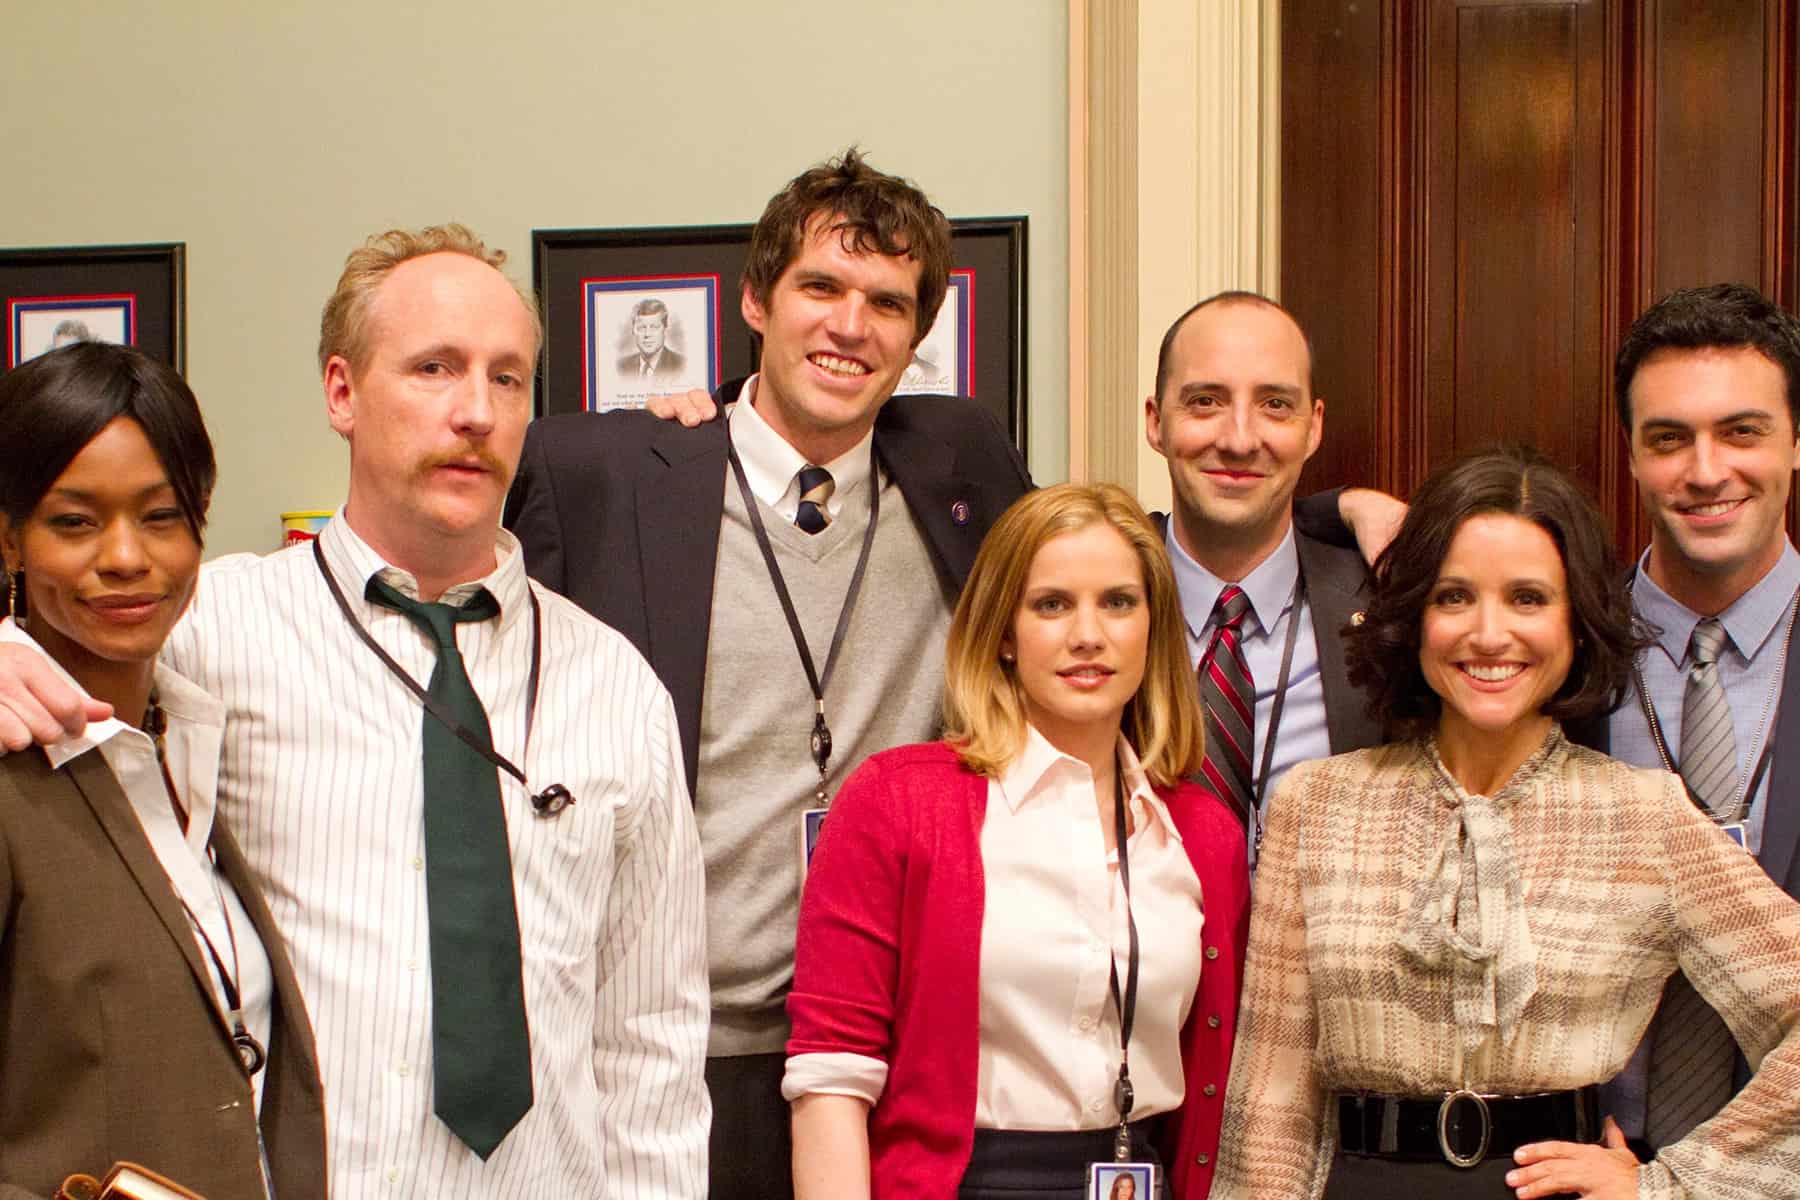 The cast of the show, Veep, together